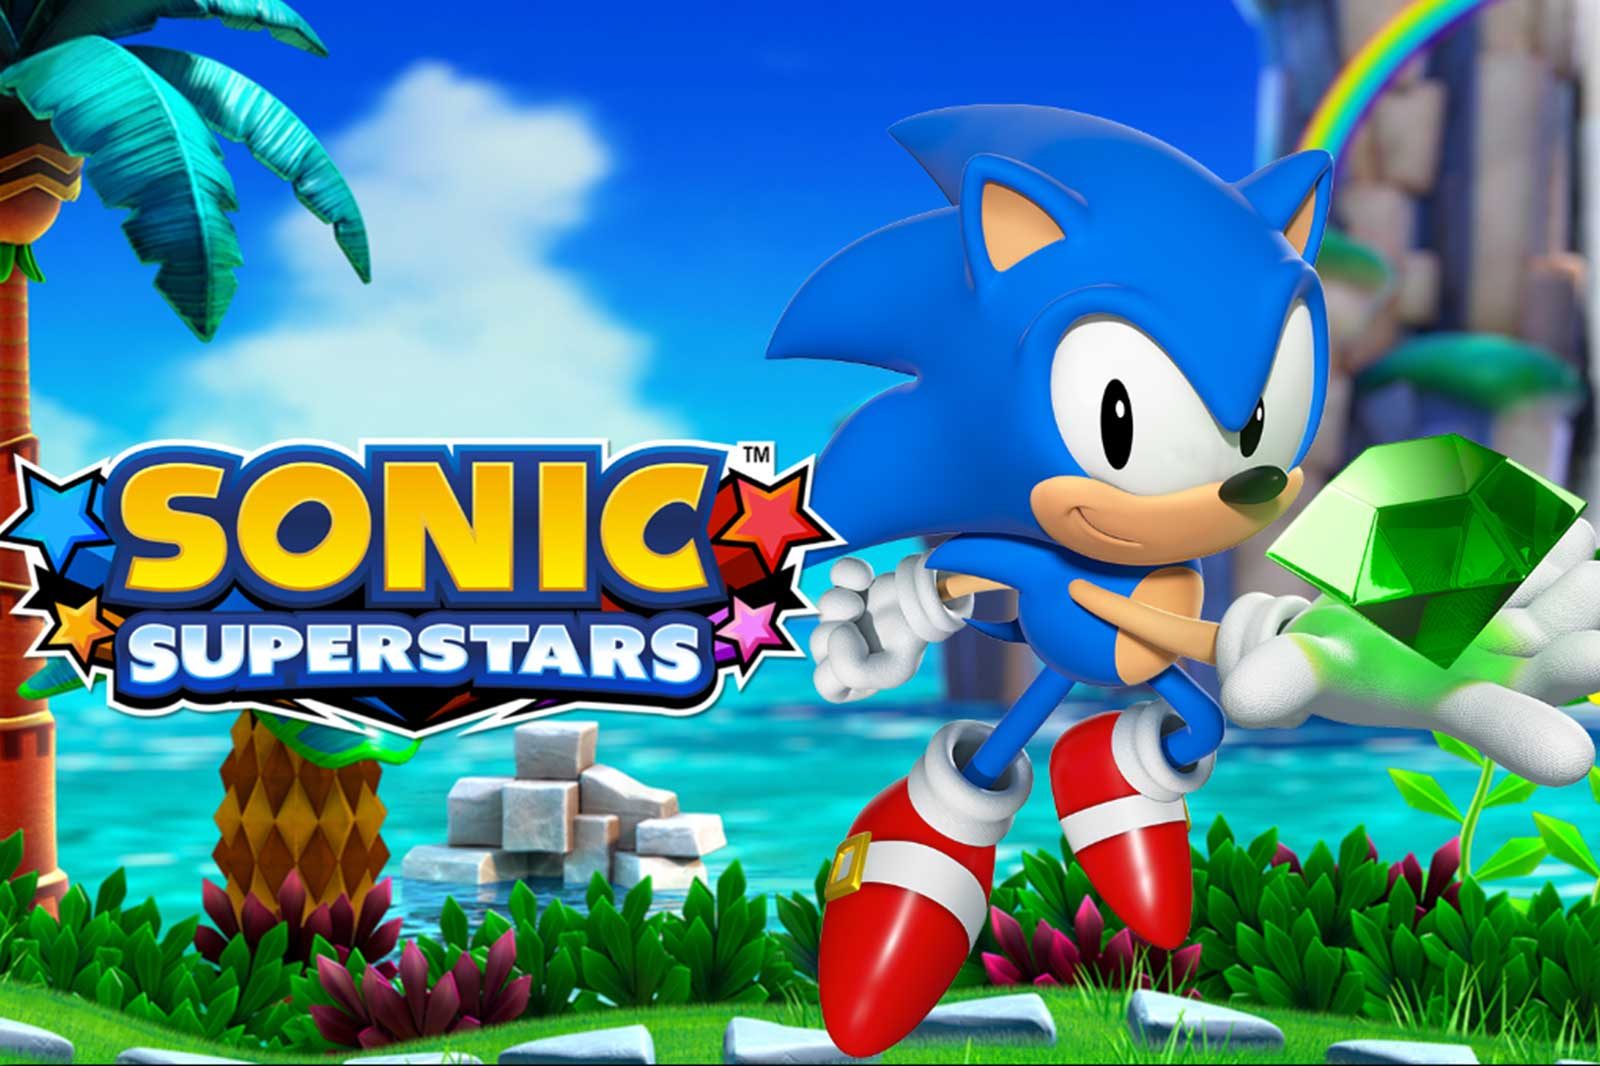 Sonic Superstars est sorti sur PlayStation 4, PlayStation 5, Xbox One, Xbox Series, Nintendo Switch et PC